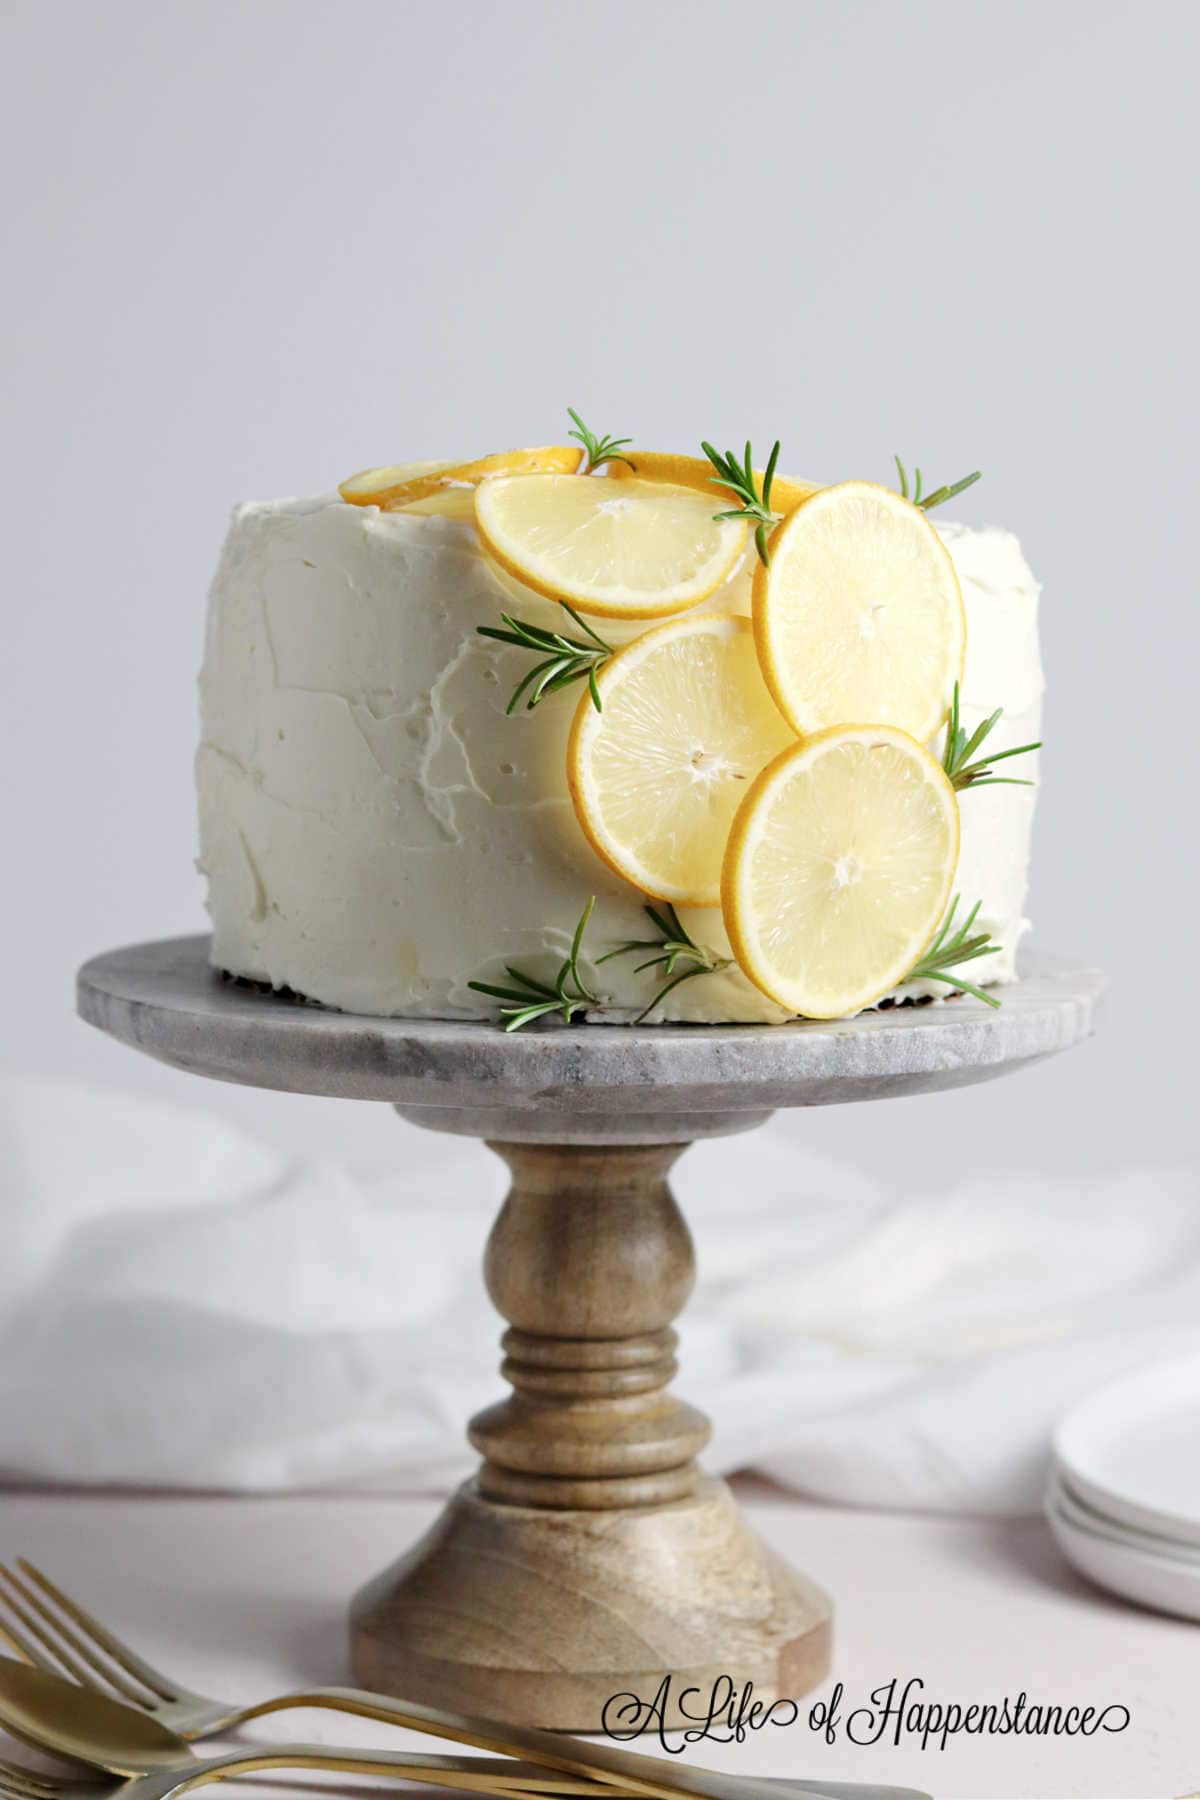 The lemon rosemary cake on a cake stand.